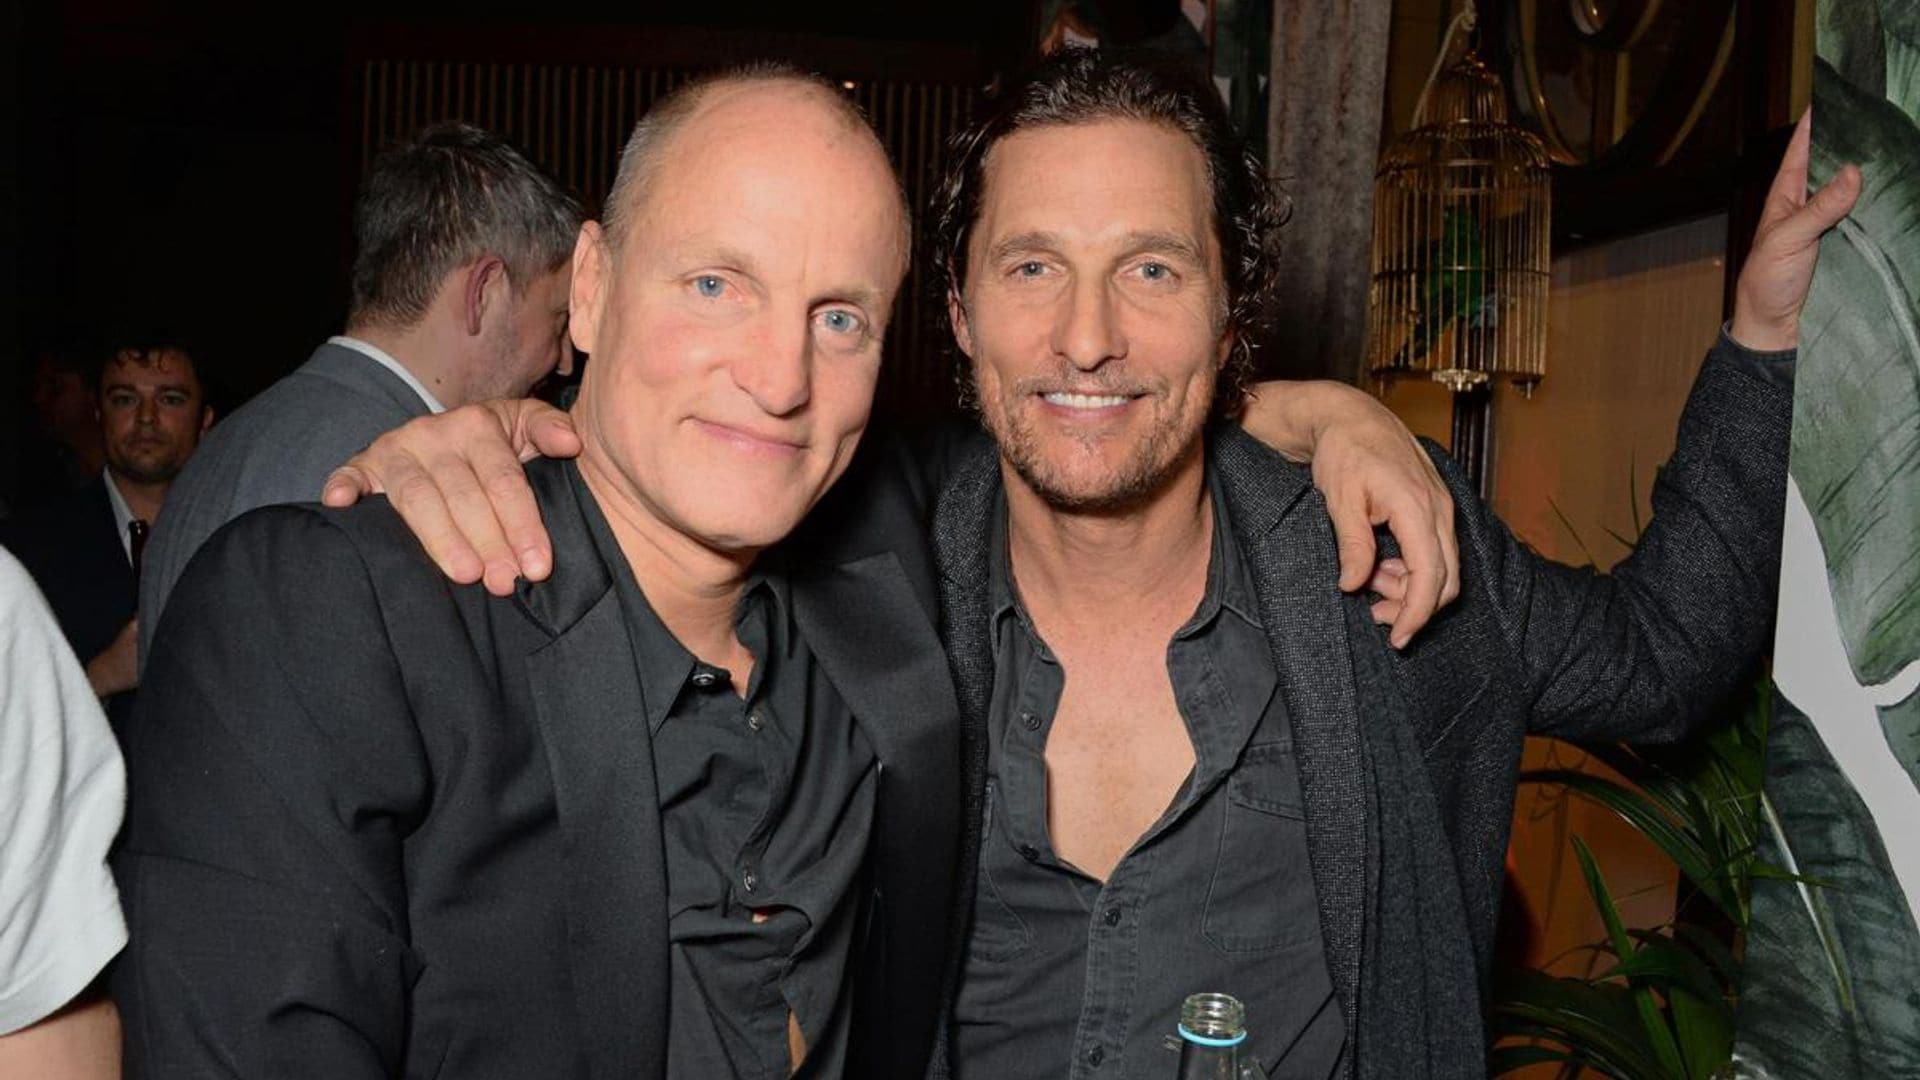 Matthew McConaughey reveals he and Woody Harrelson could be brothers